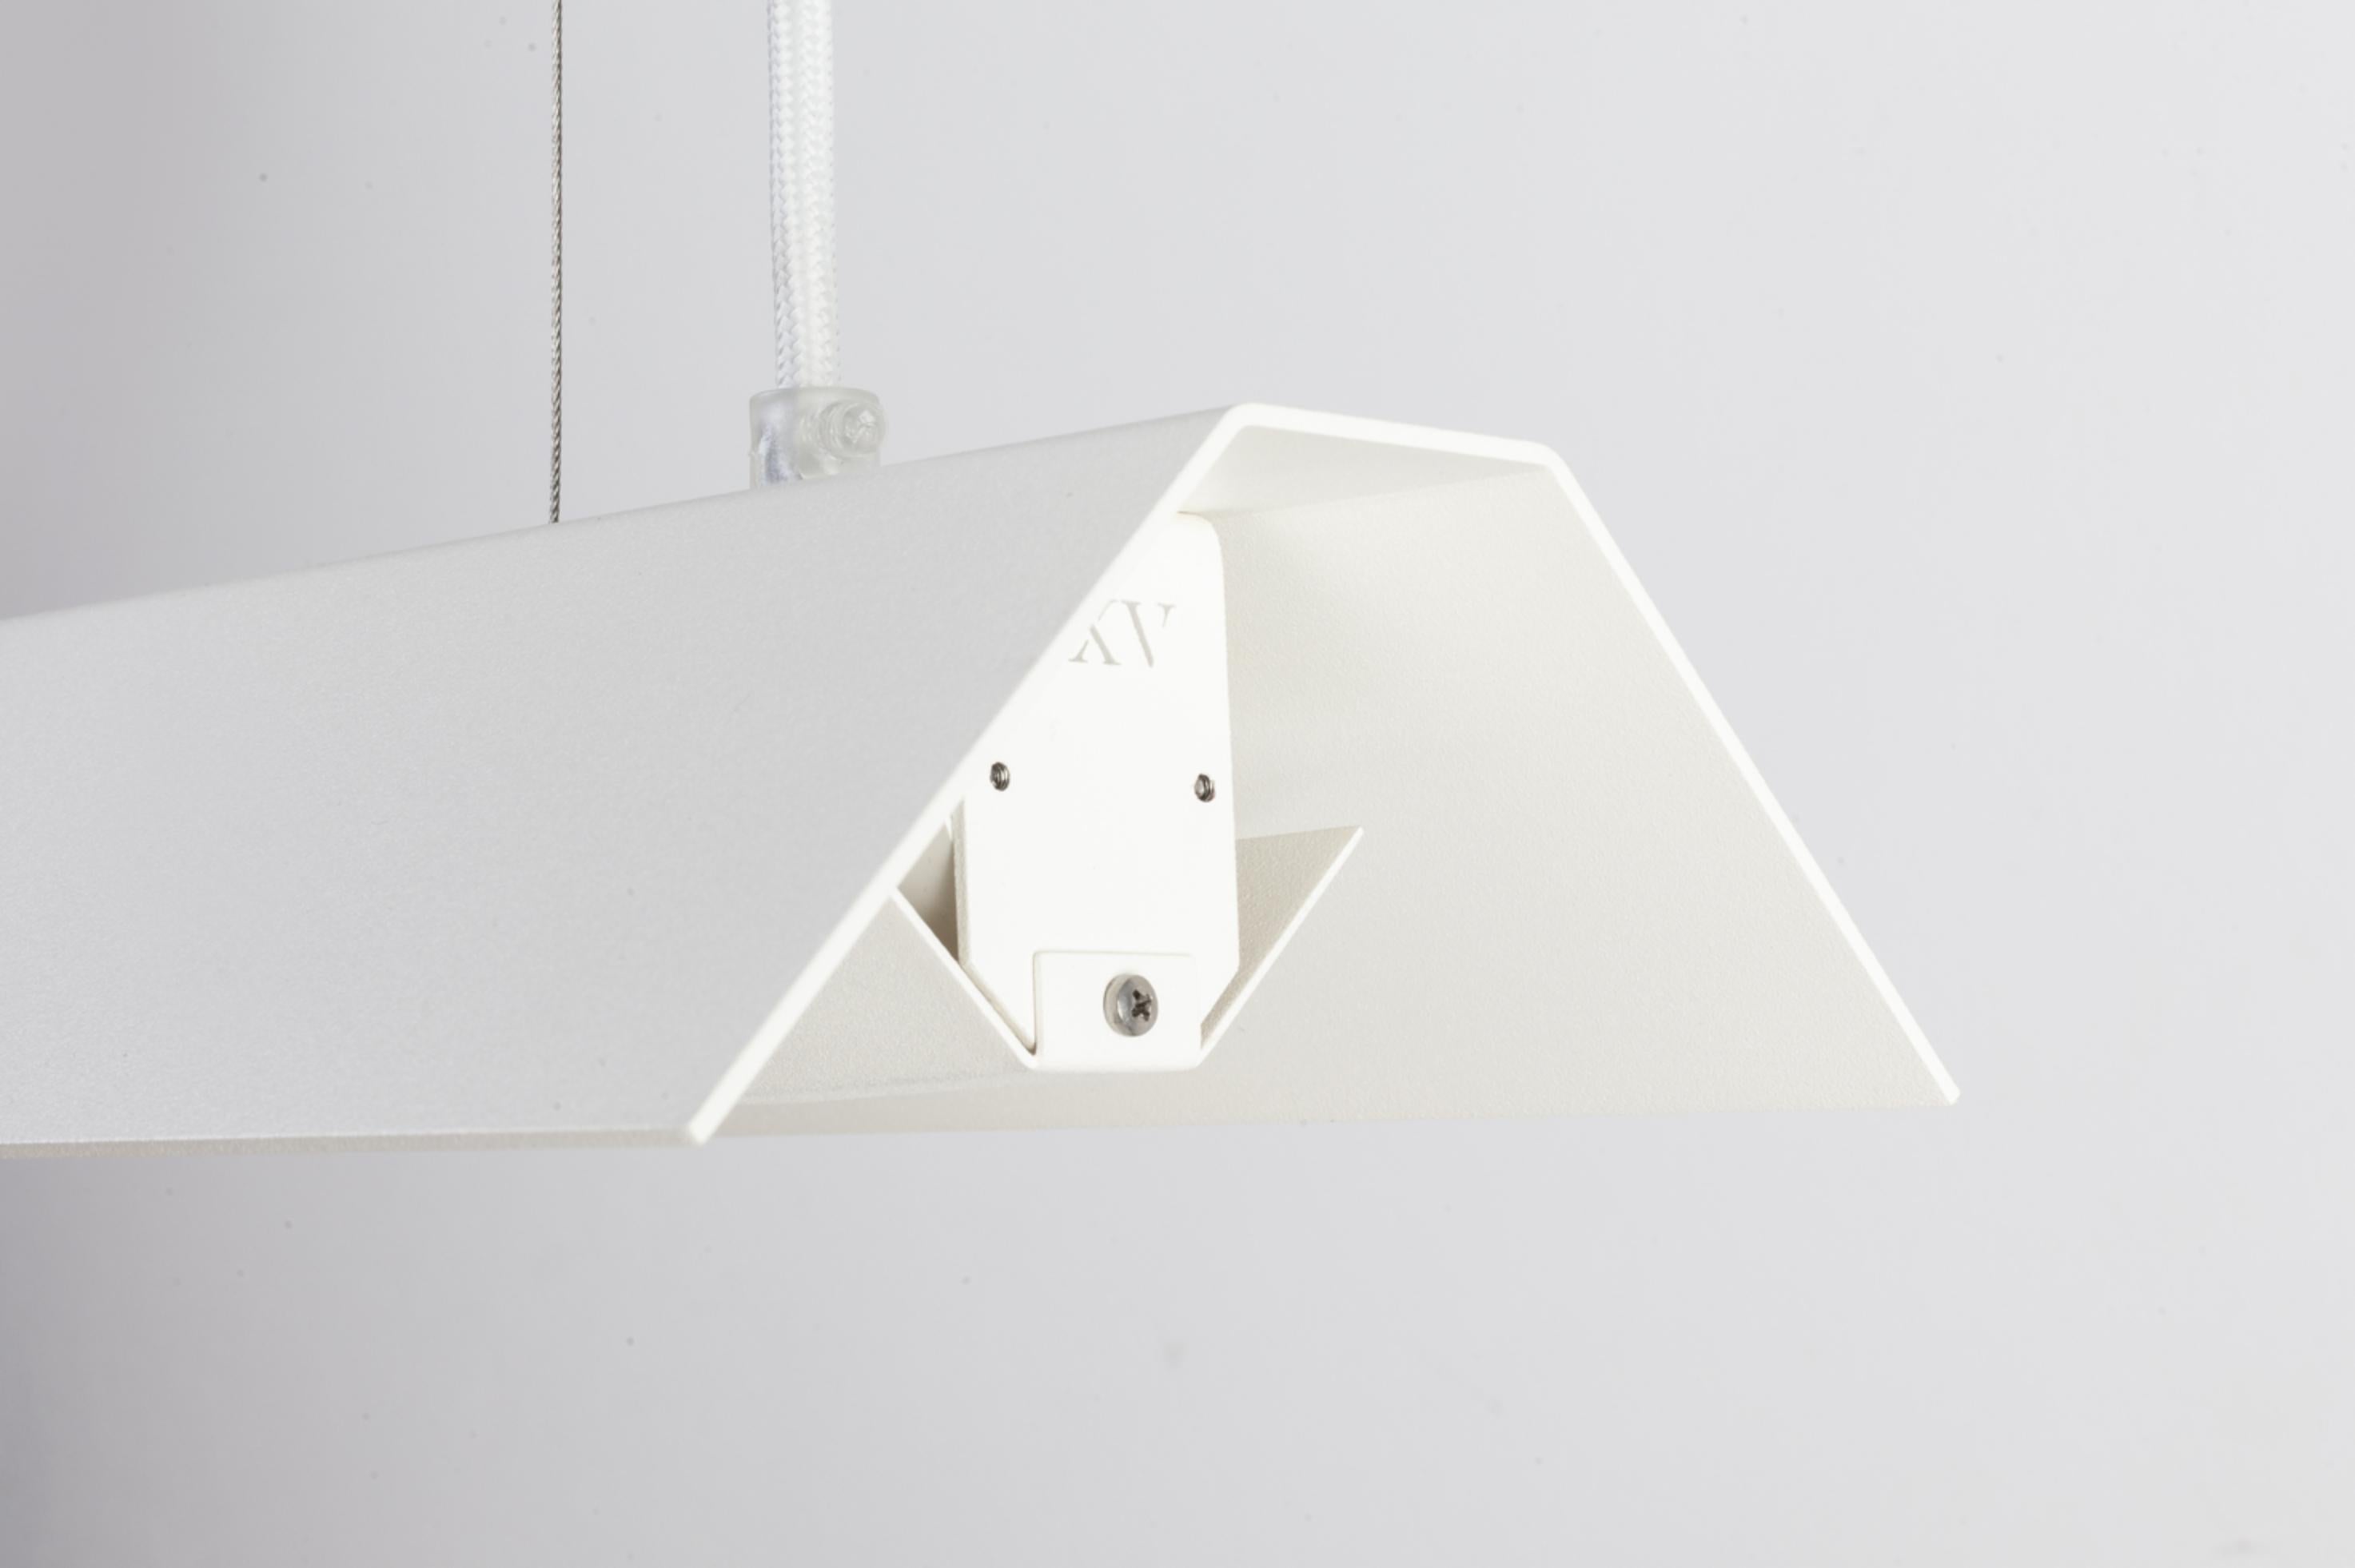 Extra large misalliance ral pure white suspended light by lexavala.
Dimensions: D 16 x W 160 x H 8 cm
Materials: powder coated aluminium.

There are two lenghts of socket covers, extending over the LED. Two short are to be found in Suspended and